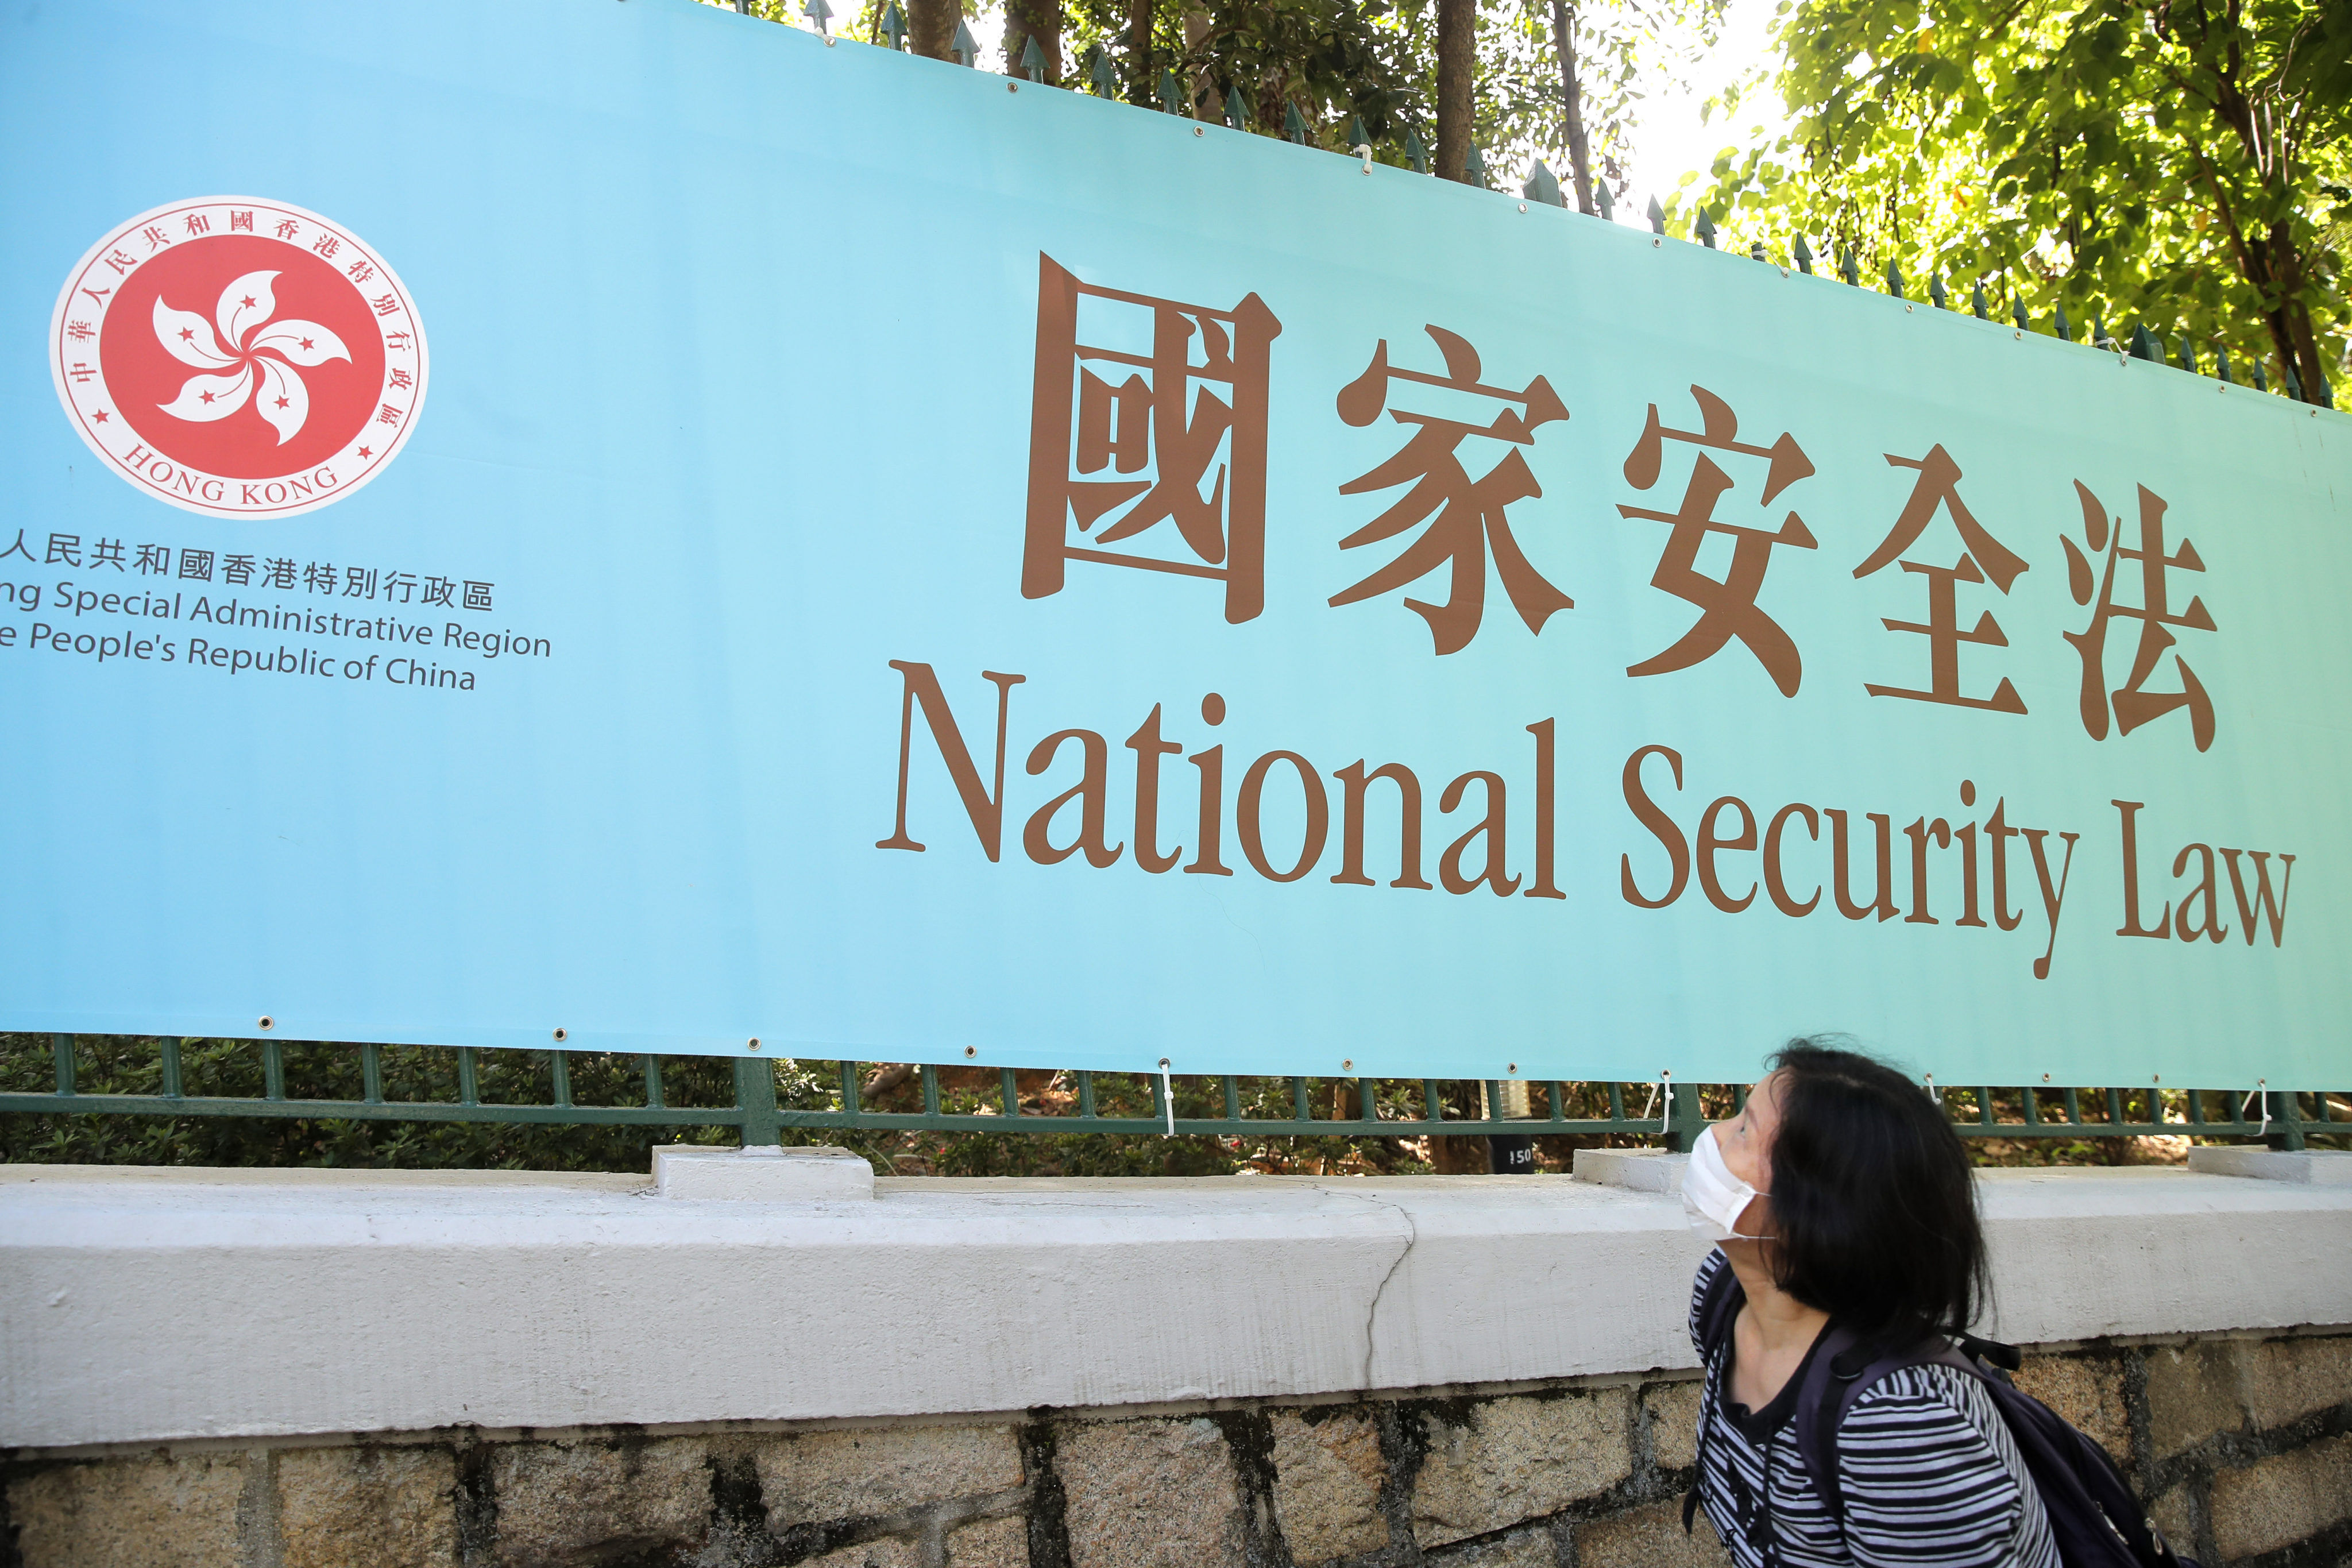 A woman walks past a promotional banner for the national security law in Hong Kong on June 30, 2020. Photo: AP